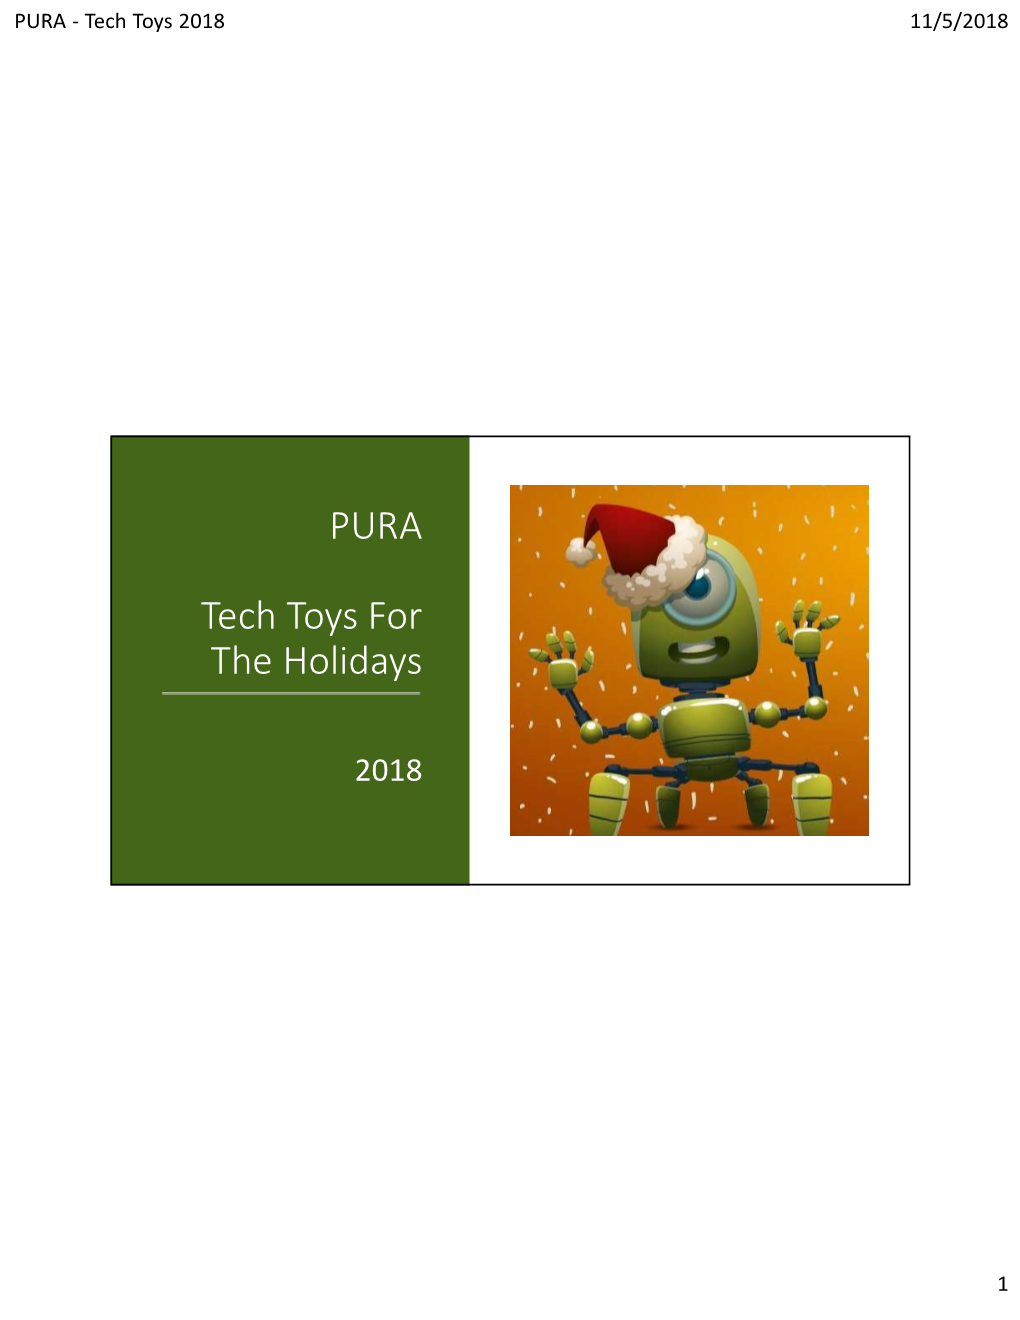 PURA Tech Toys for the Holidays